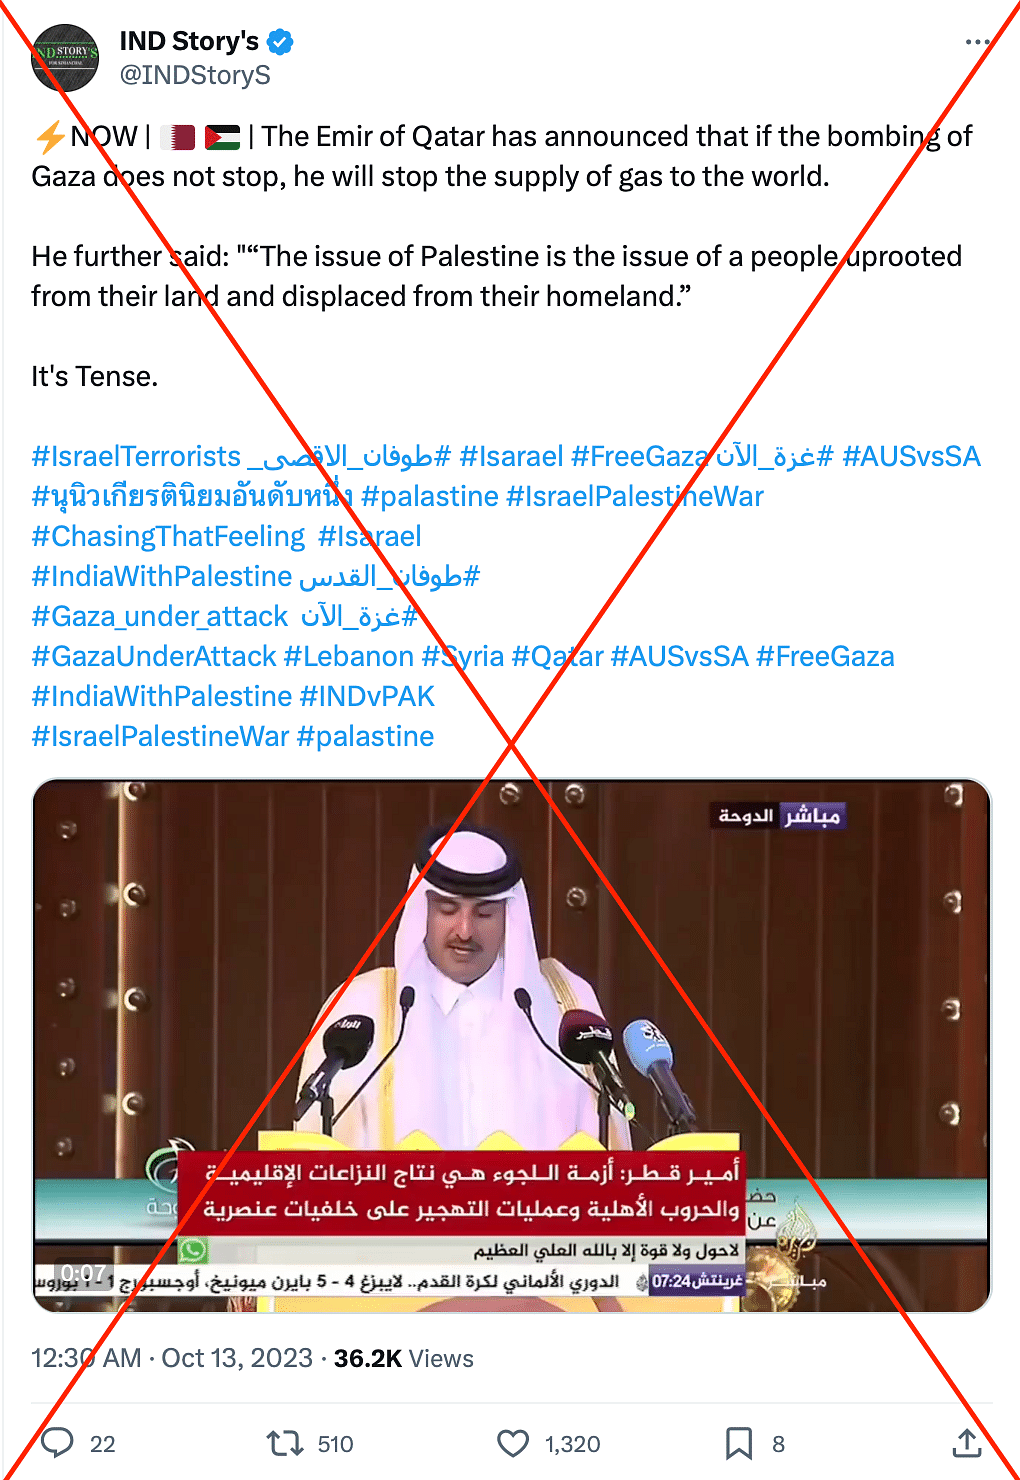 A 2017 video of Qatar's Chief Sheikh Tamim bin Hamad Al Thani is being shared with false claims about Gaza.